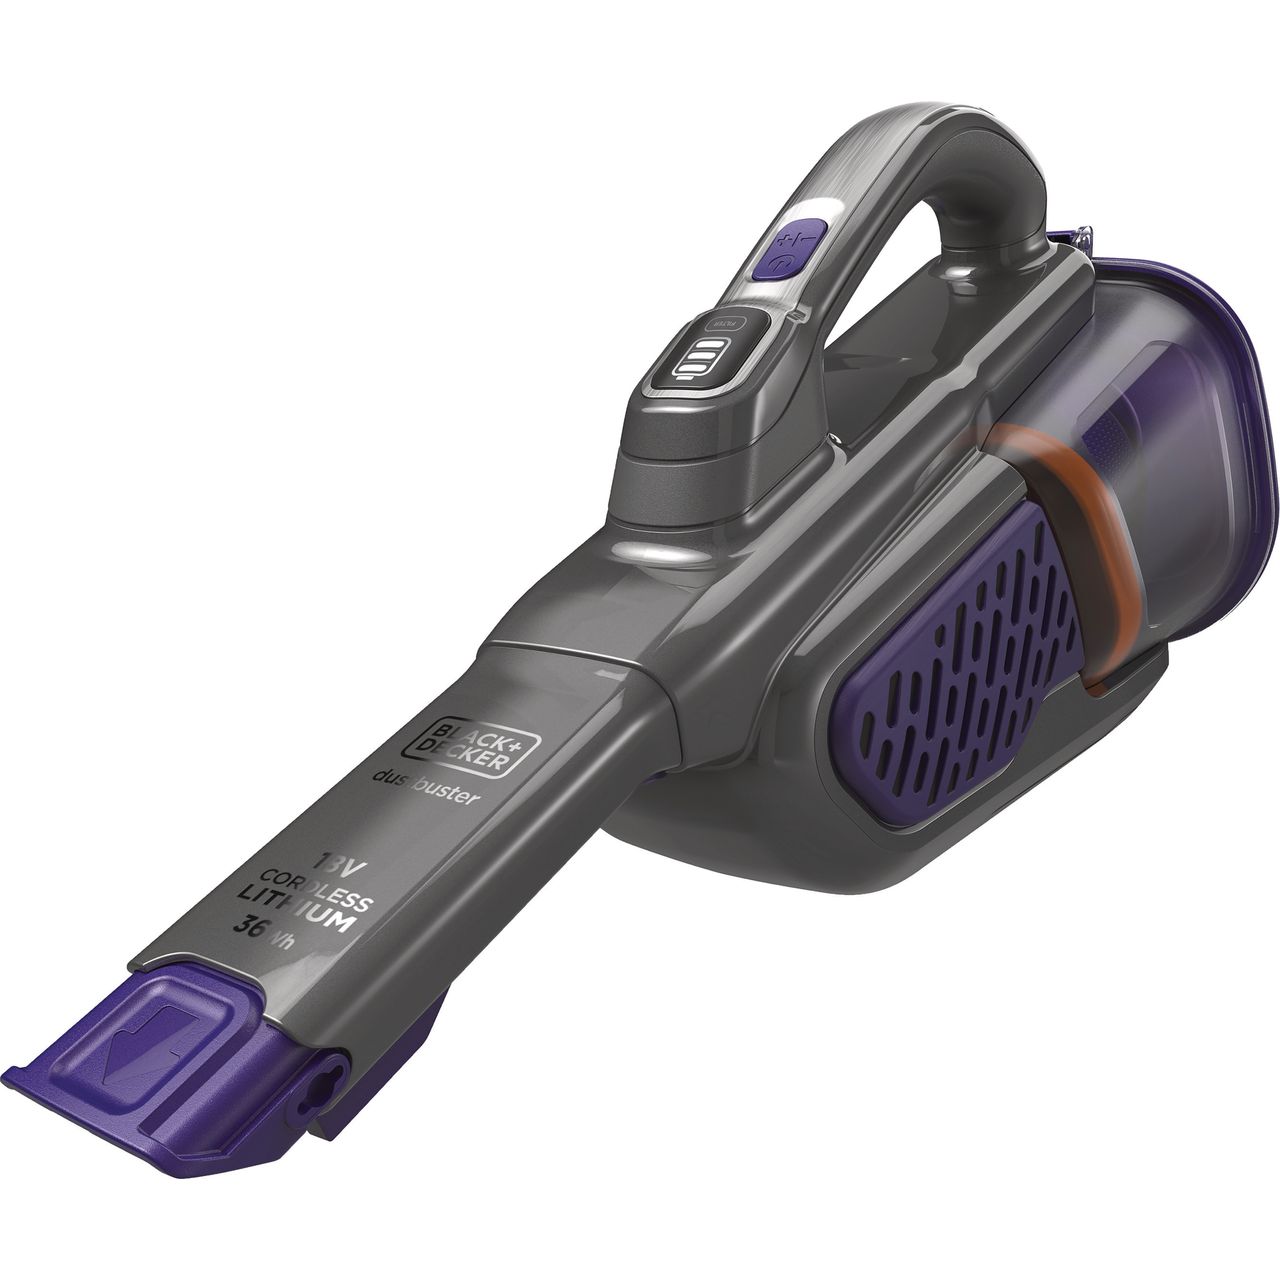 Black + Decker 18v Extension Pet Stick BHHV520BFP-GB Handheld Vacuum Cleaner with up to 21 Minutes Run Time Review